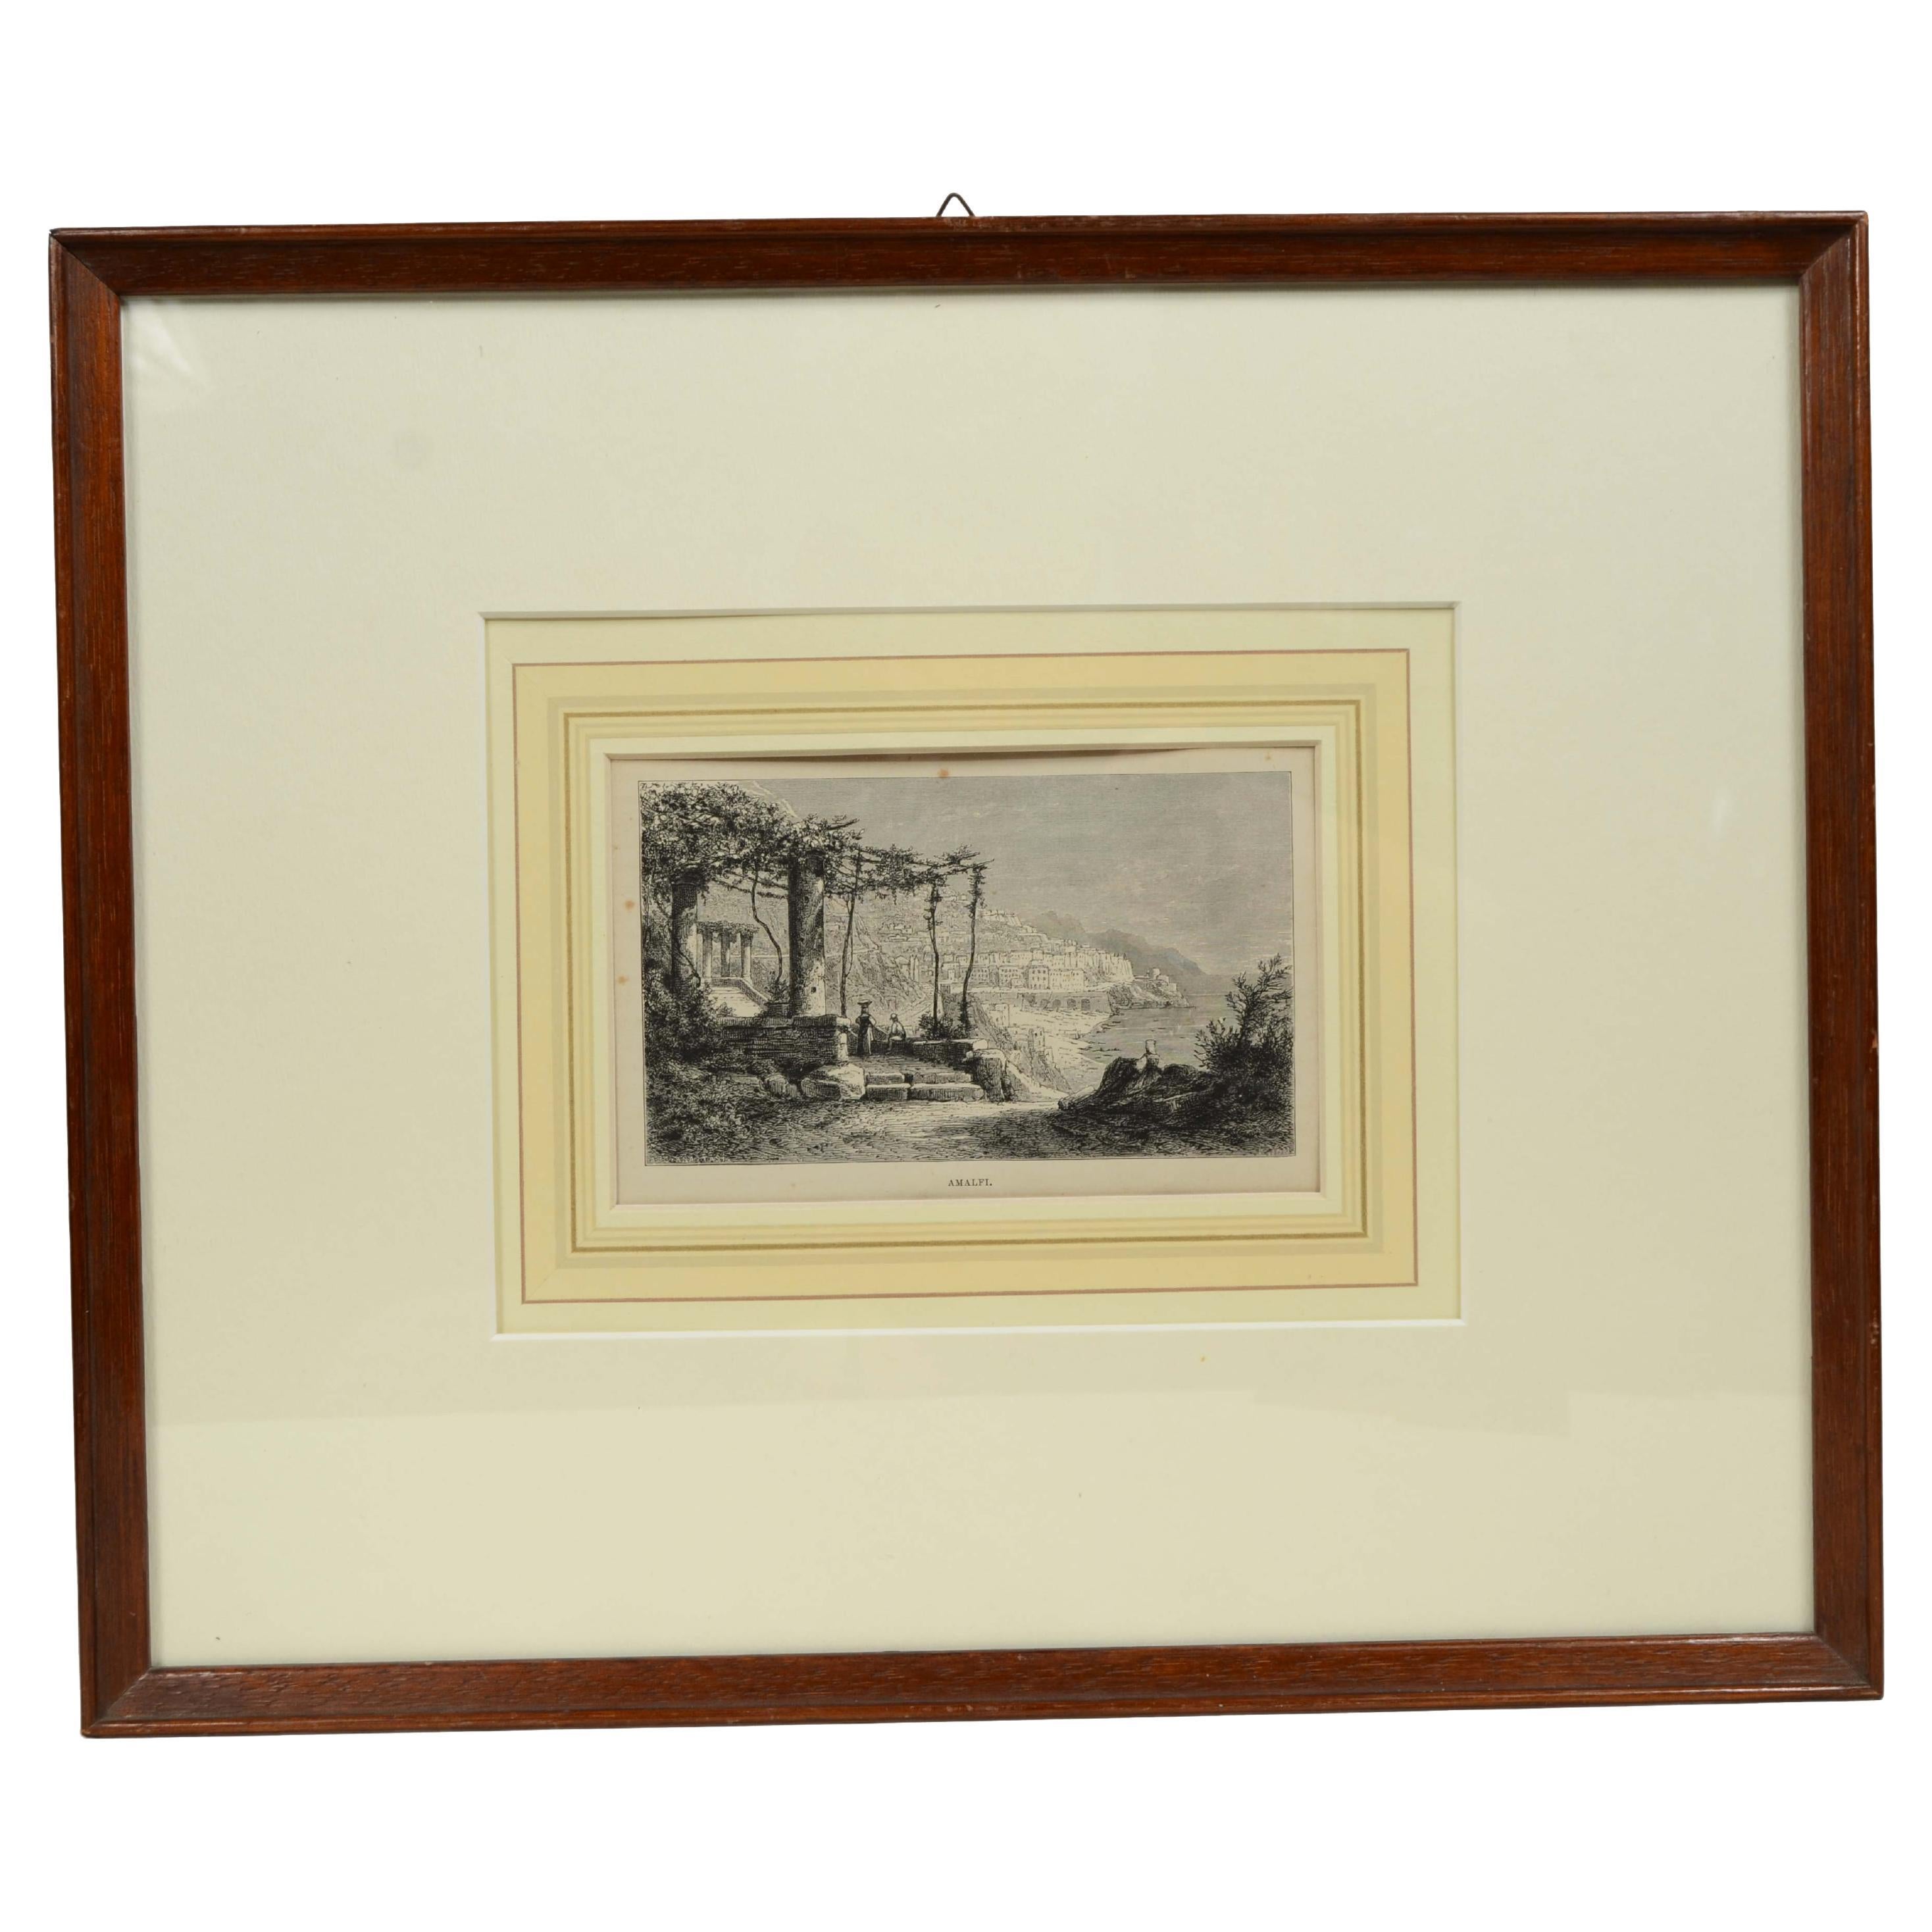 Lithograph on paper of Amalfi Italy signed Auguste Anastasi mid-19th century. For Sale